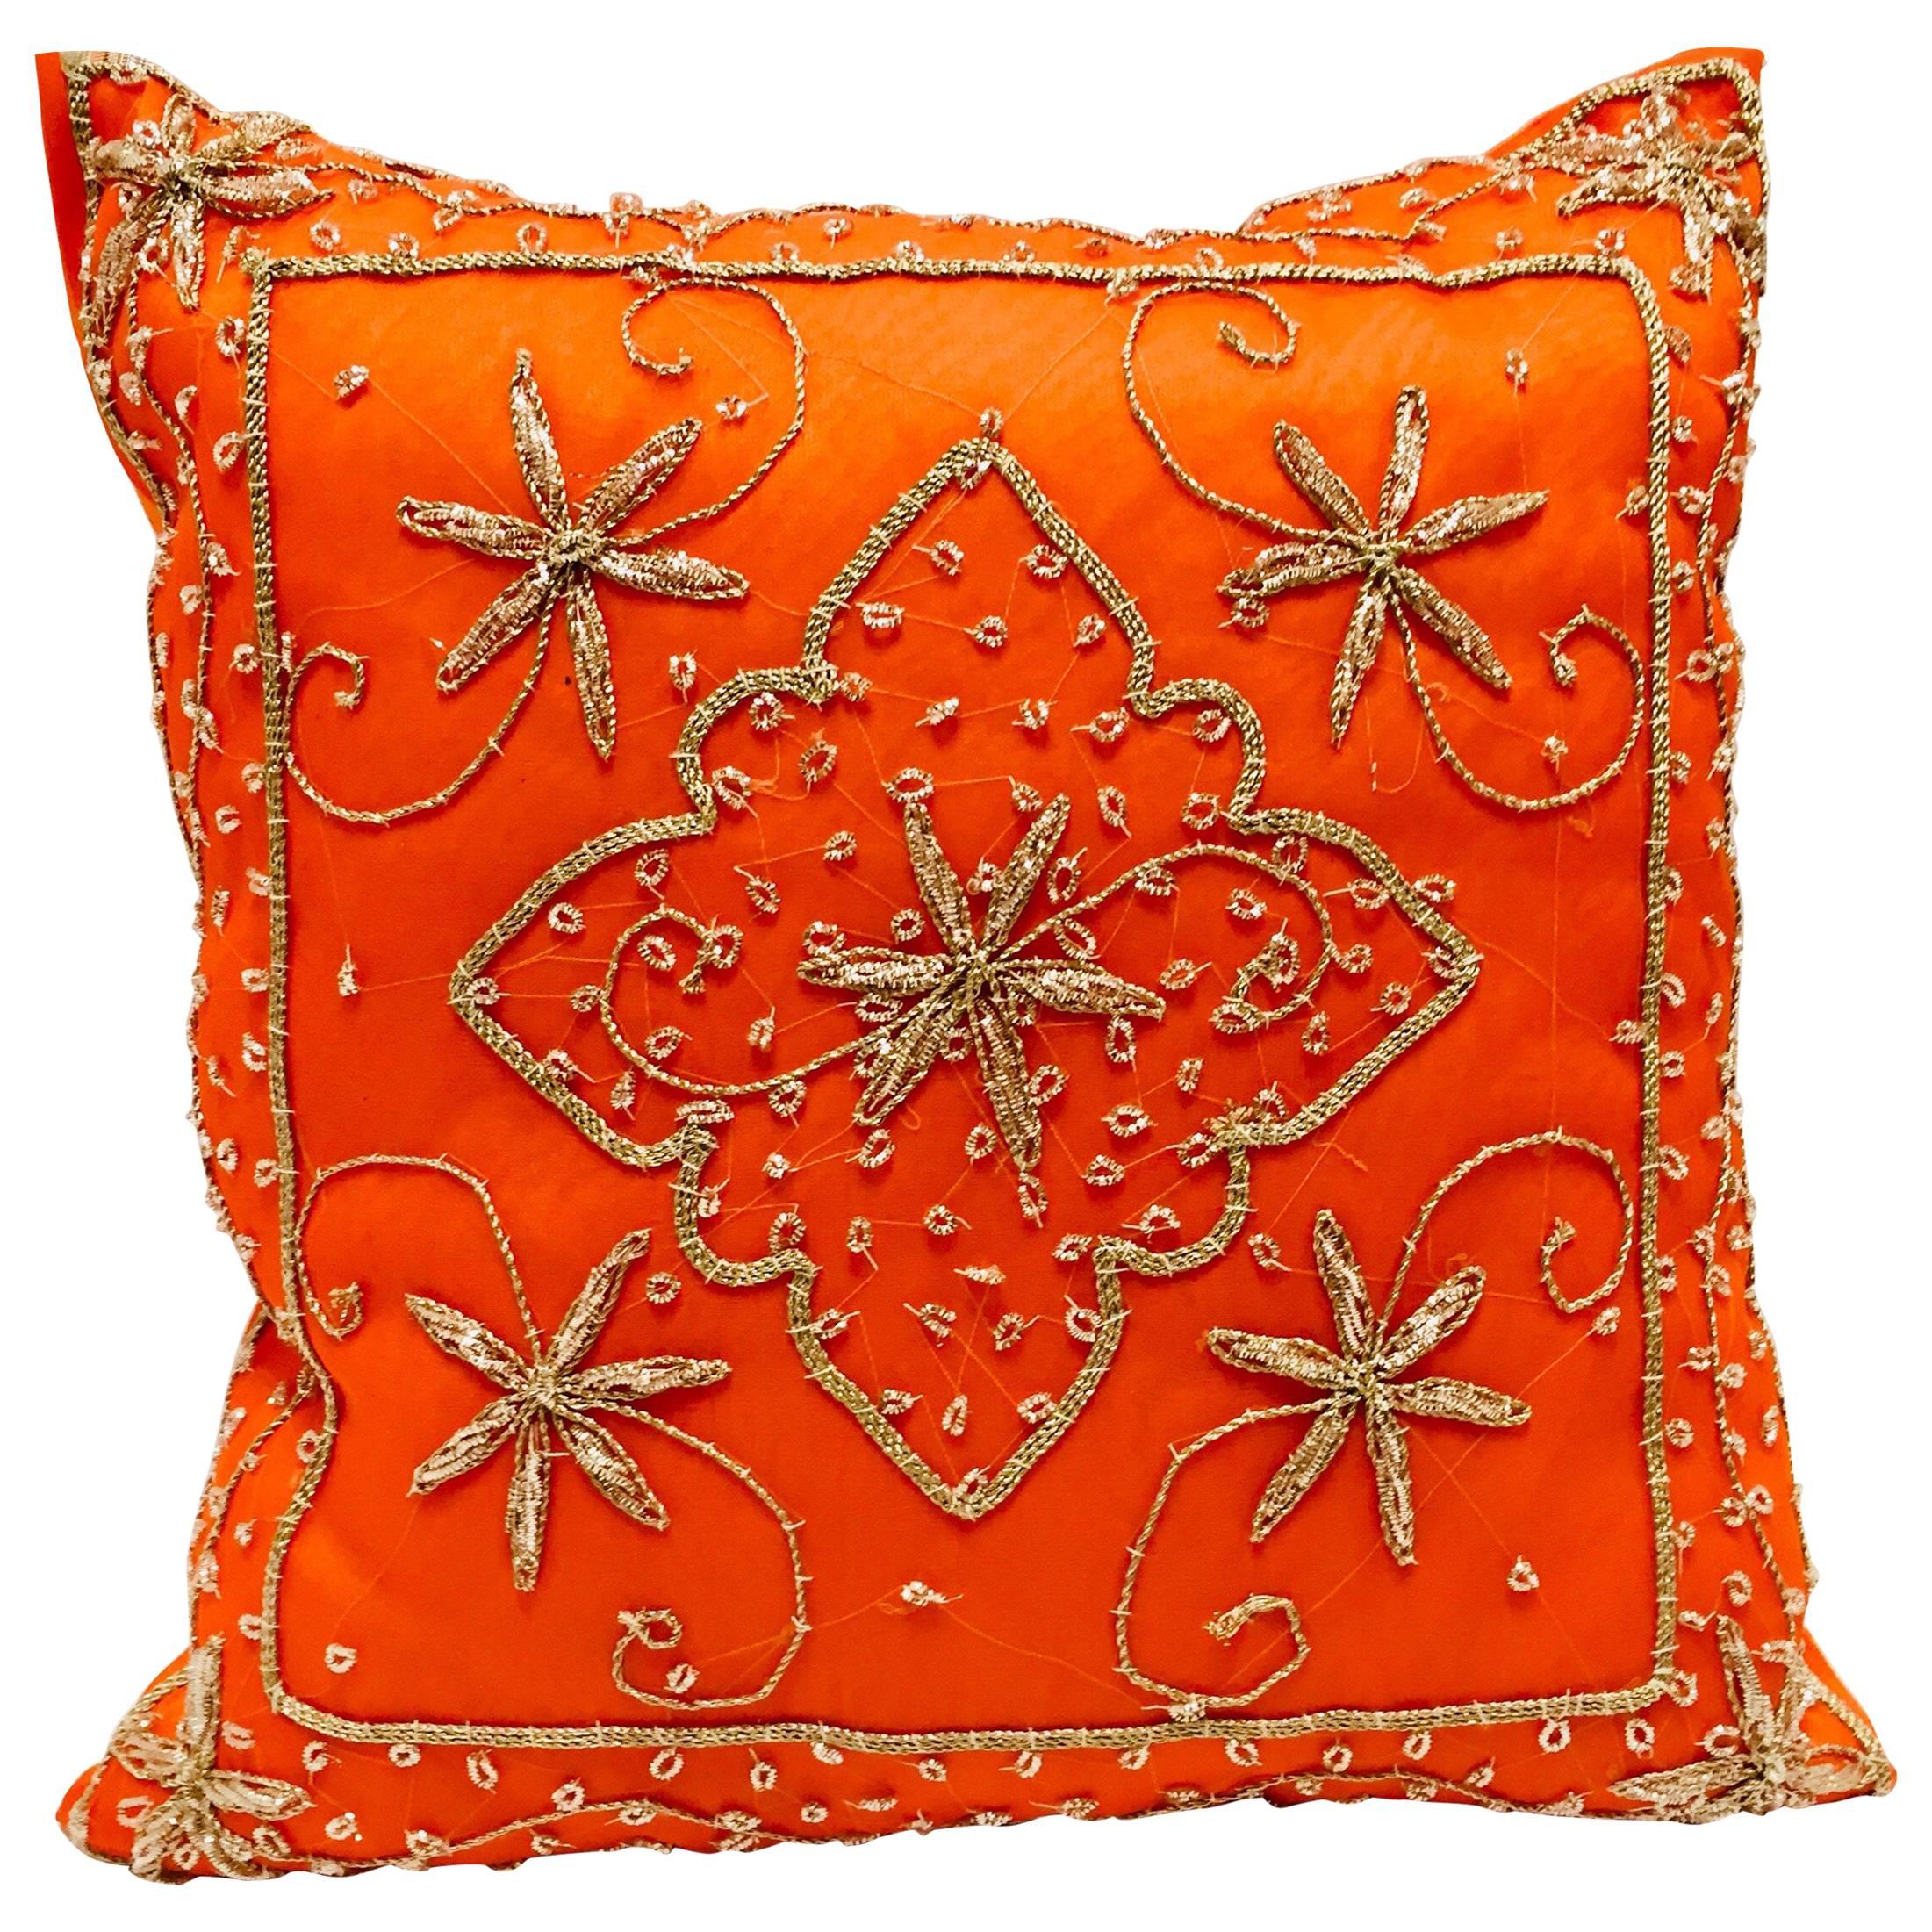 Throw Decorative Orange Accent Pillow Embellished with Sequins and Beads For Sale